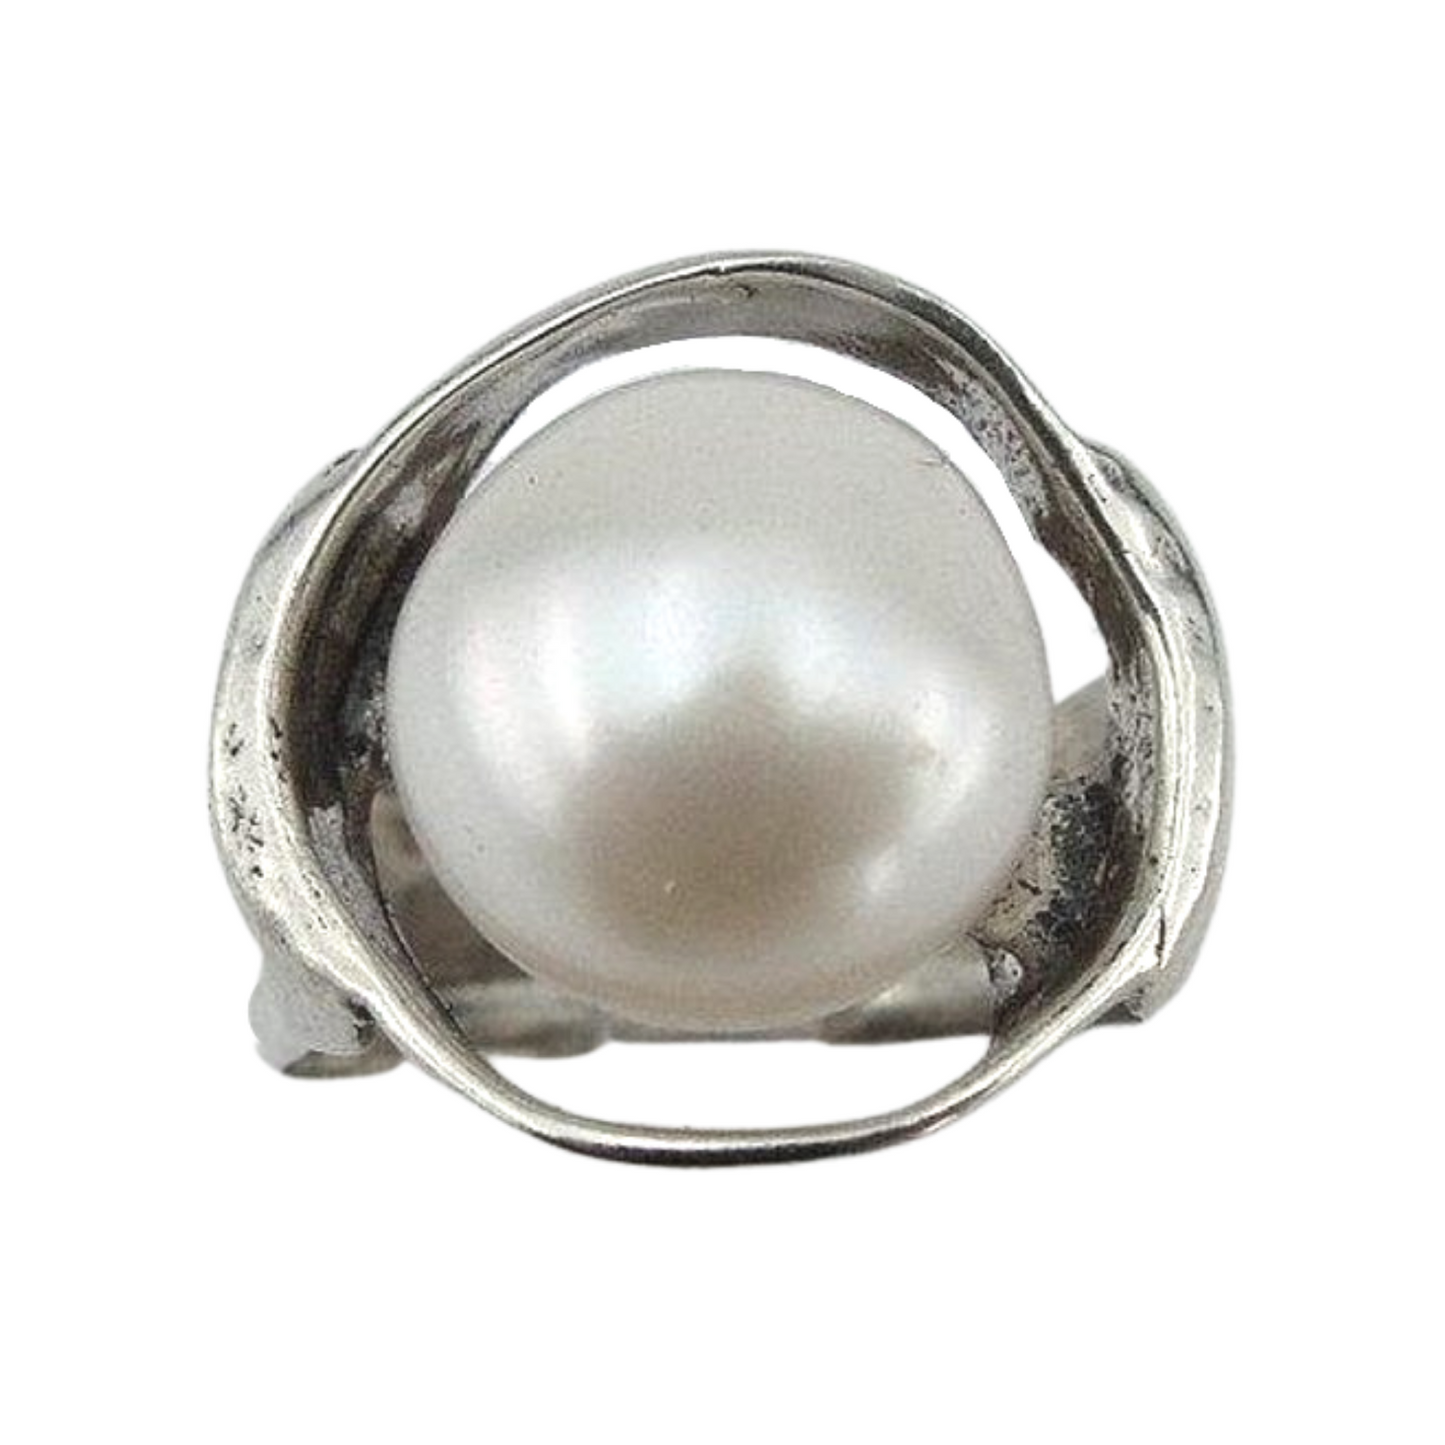 Solid sterling silver, and a Big round Natural White pearl gemstone.